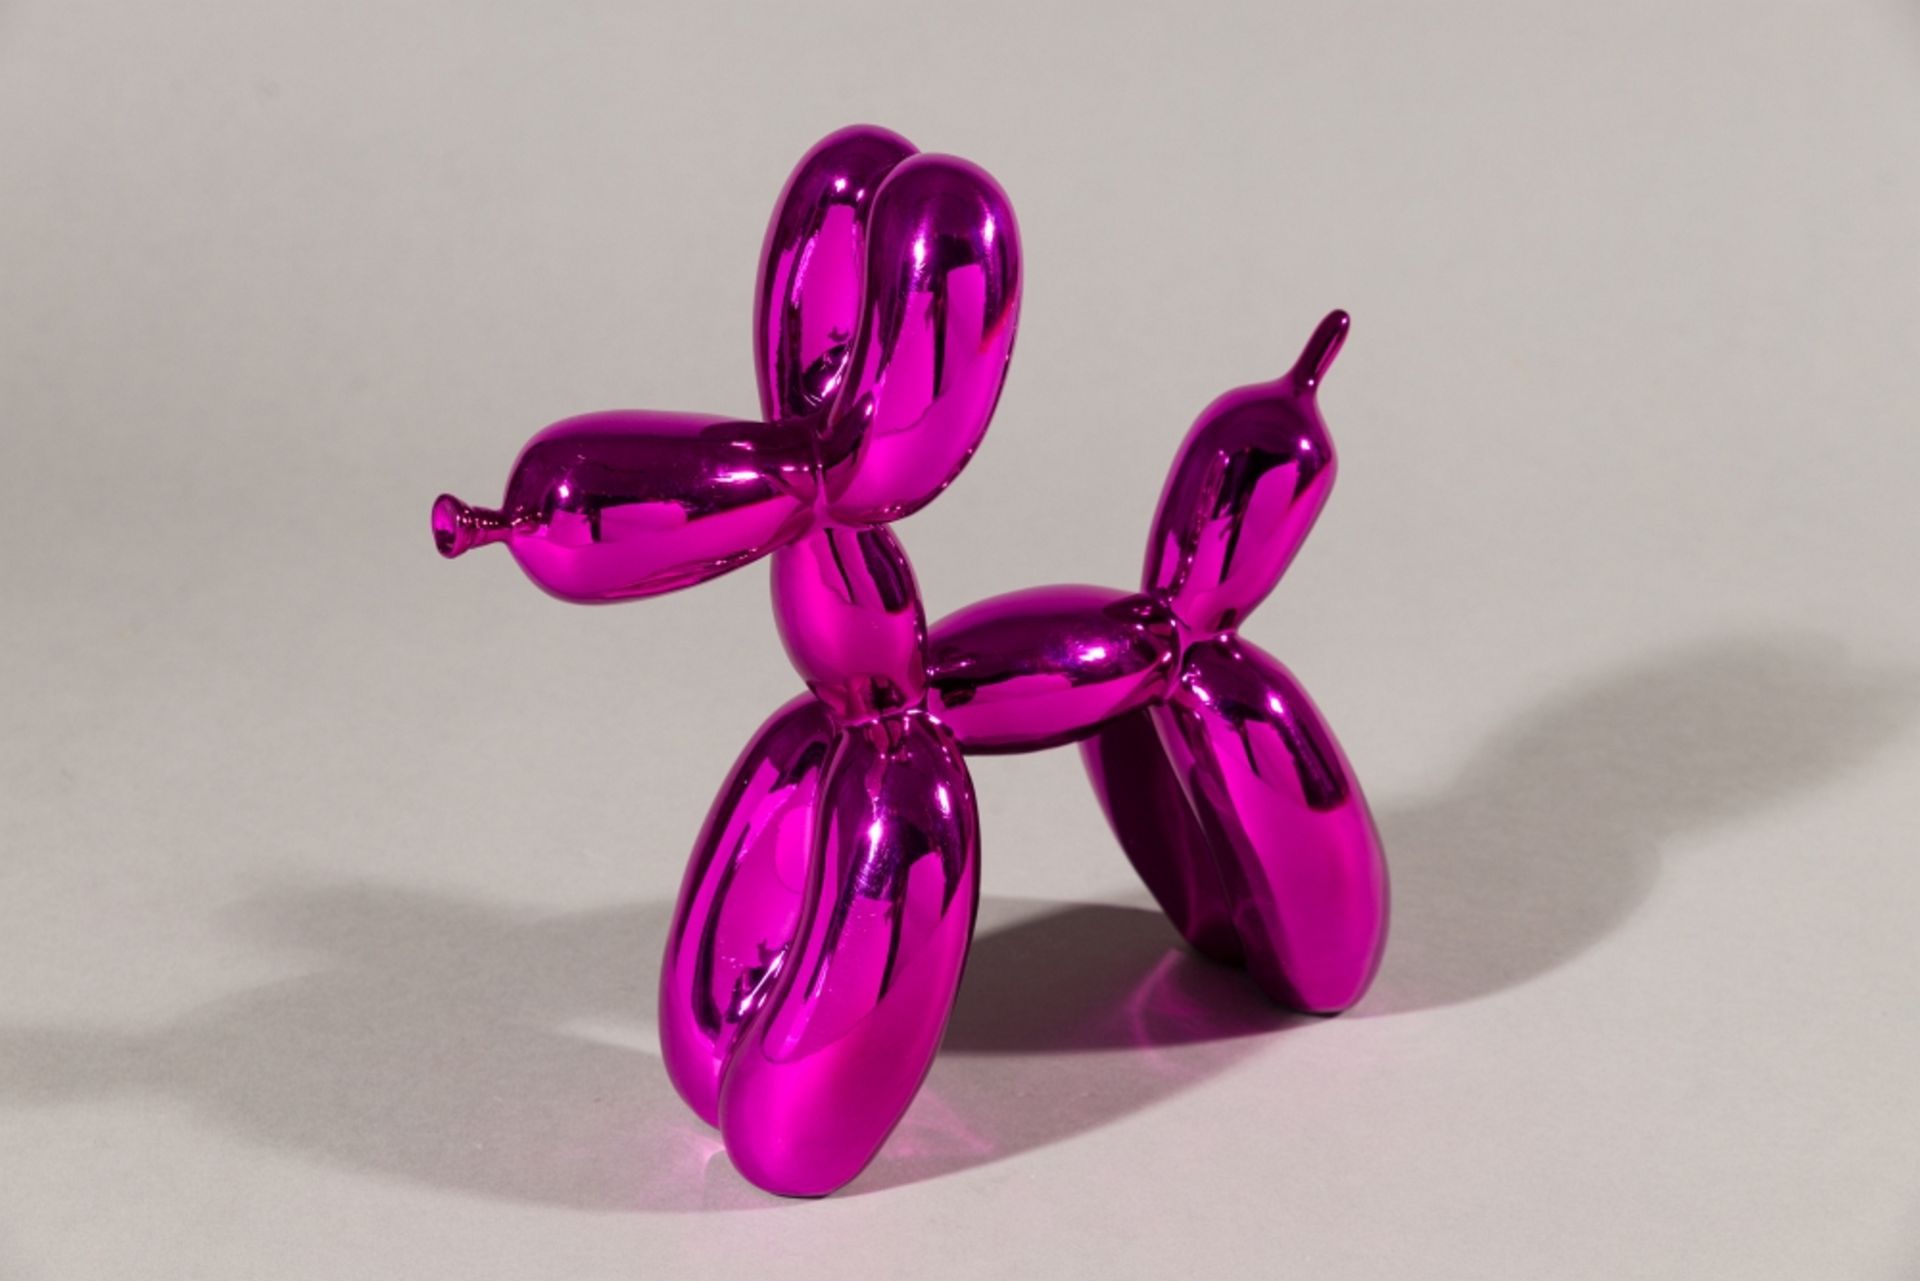 Editions Studio Balloon Dog (Pink) Cold Cast Resin Numbered: 653/999 11,8 x 11,8 x 4,7